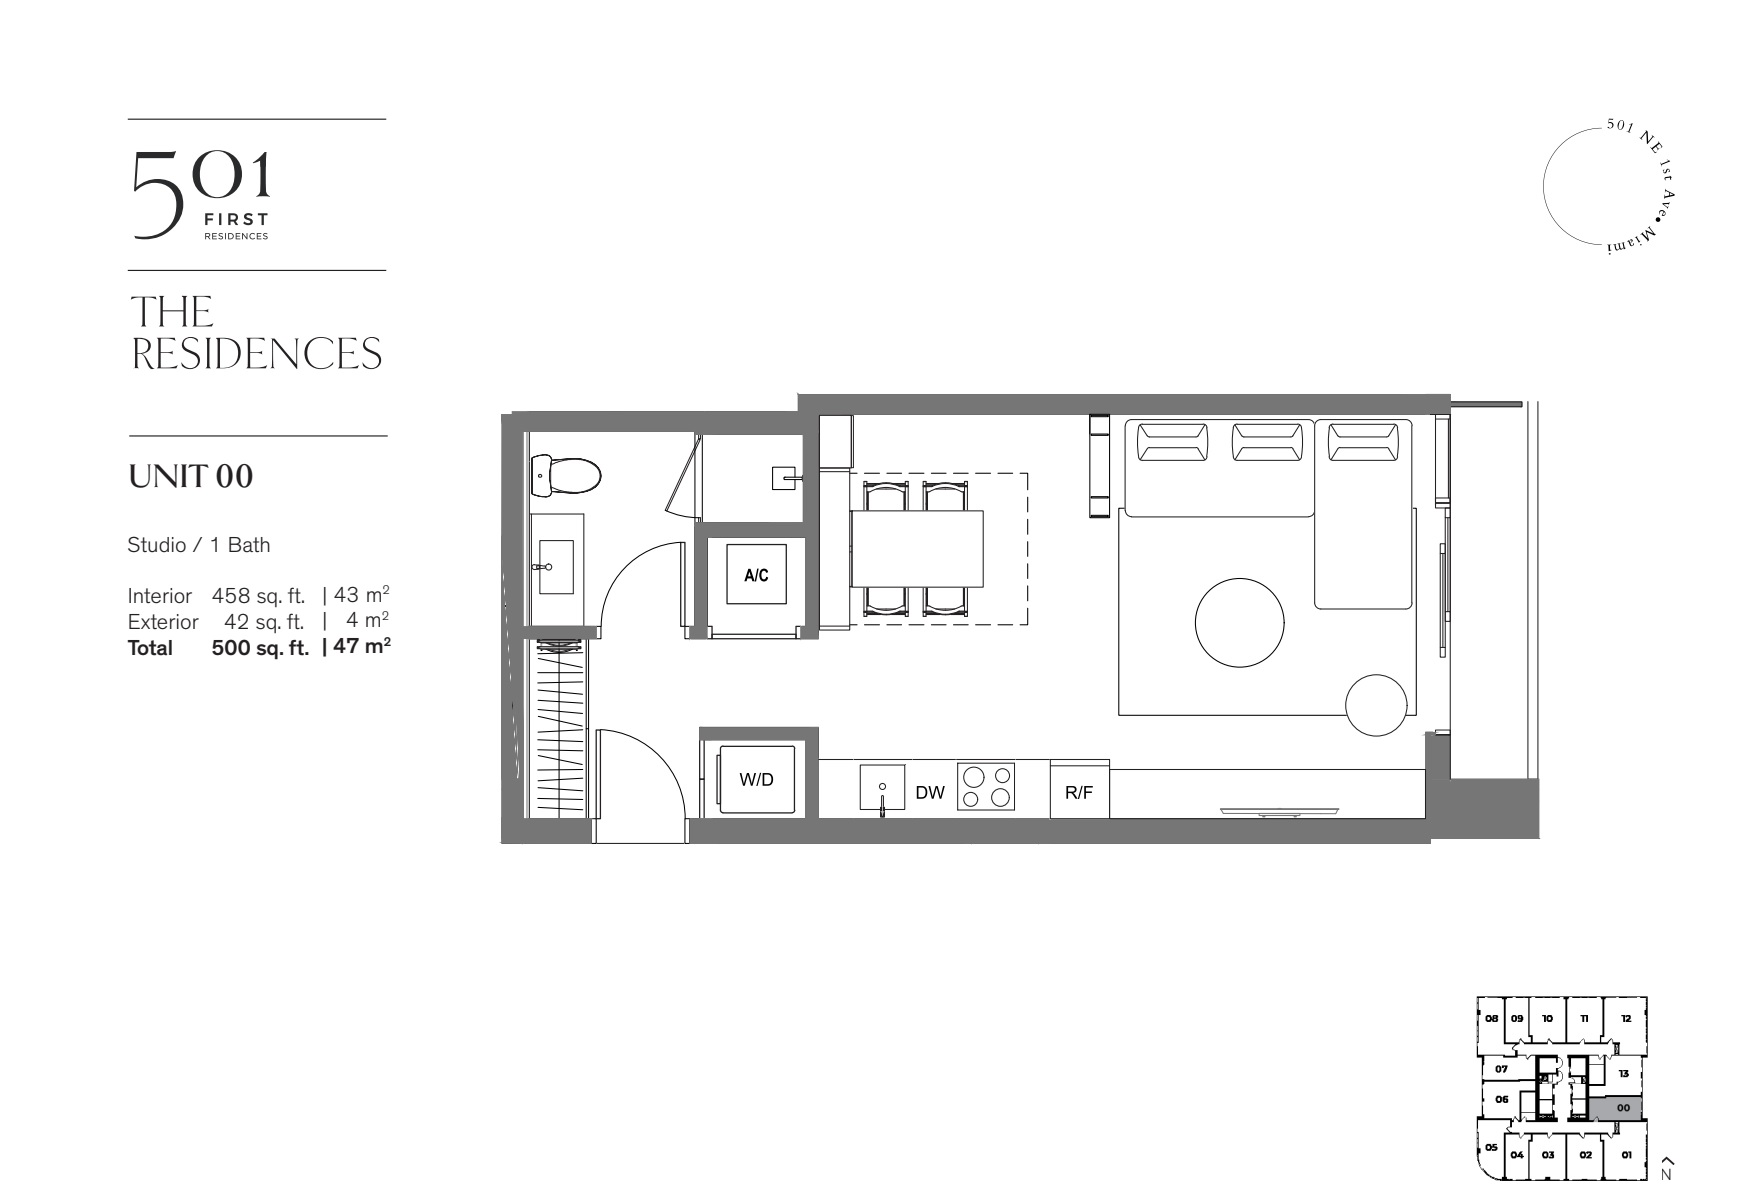 501 FIRST Residences Unit 00